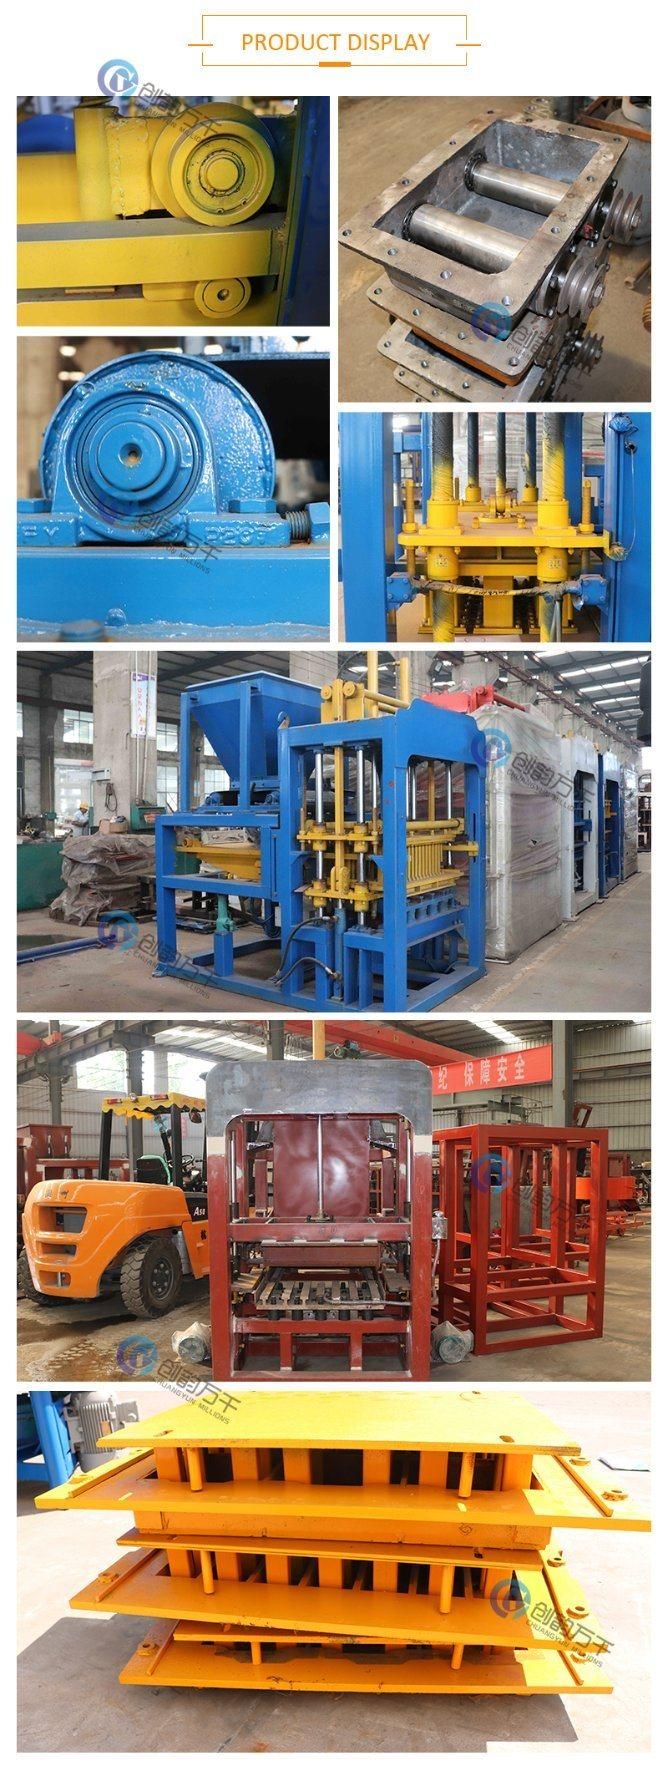 Qt4-15s Full Automatic Hydraulic Brick Machine Production with High Density and Strength